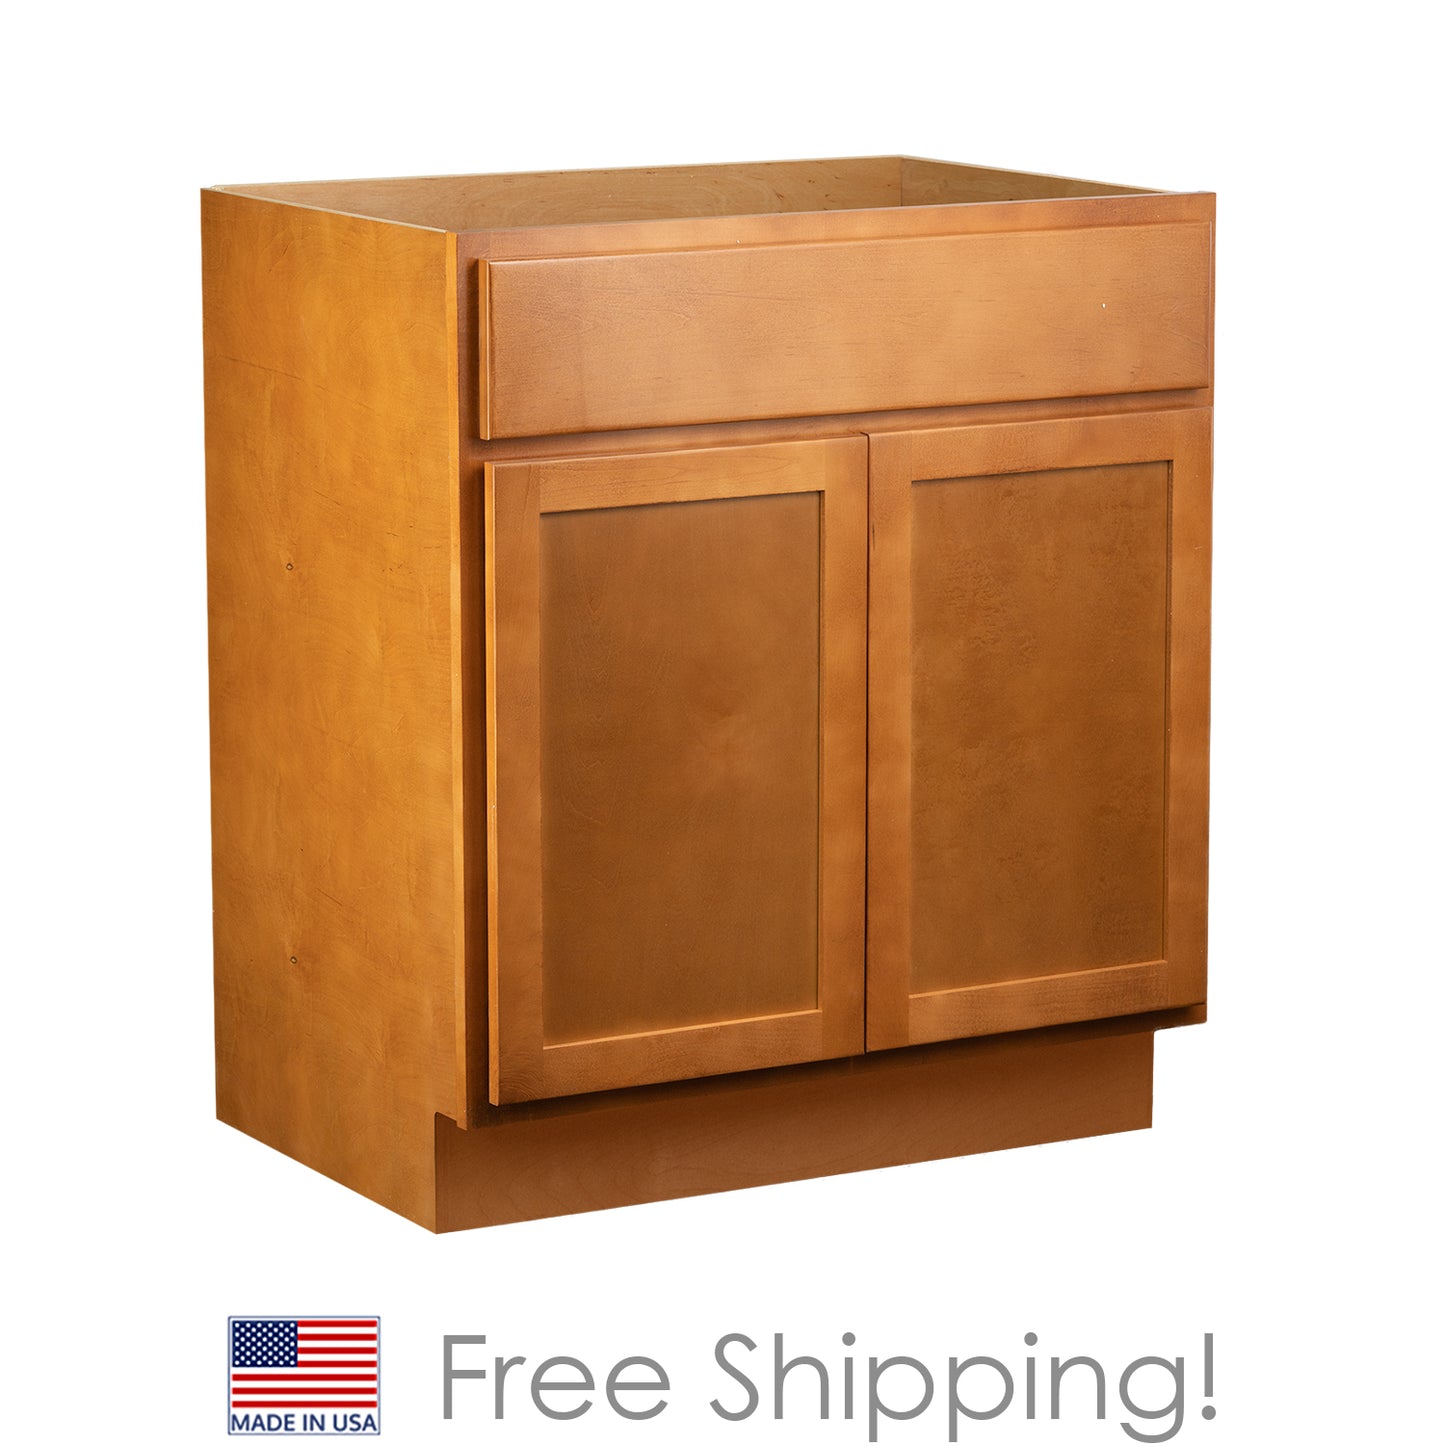 Quicklock RTA (Ready-to-Assemble) Provincial Stain Vanity Base Cabinet | 42"Wx34.5"Hx21"D